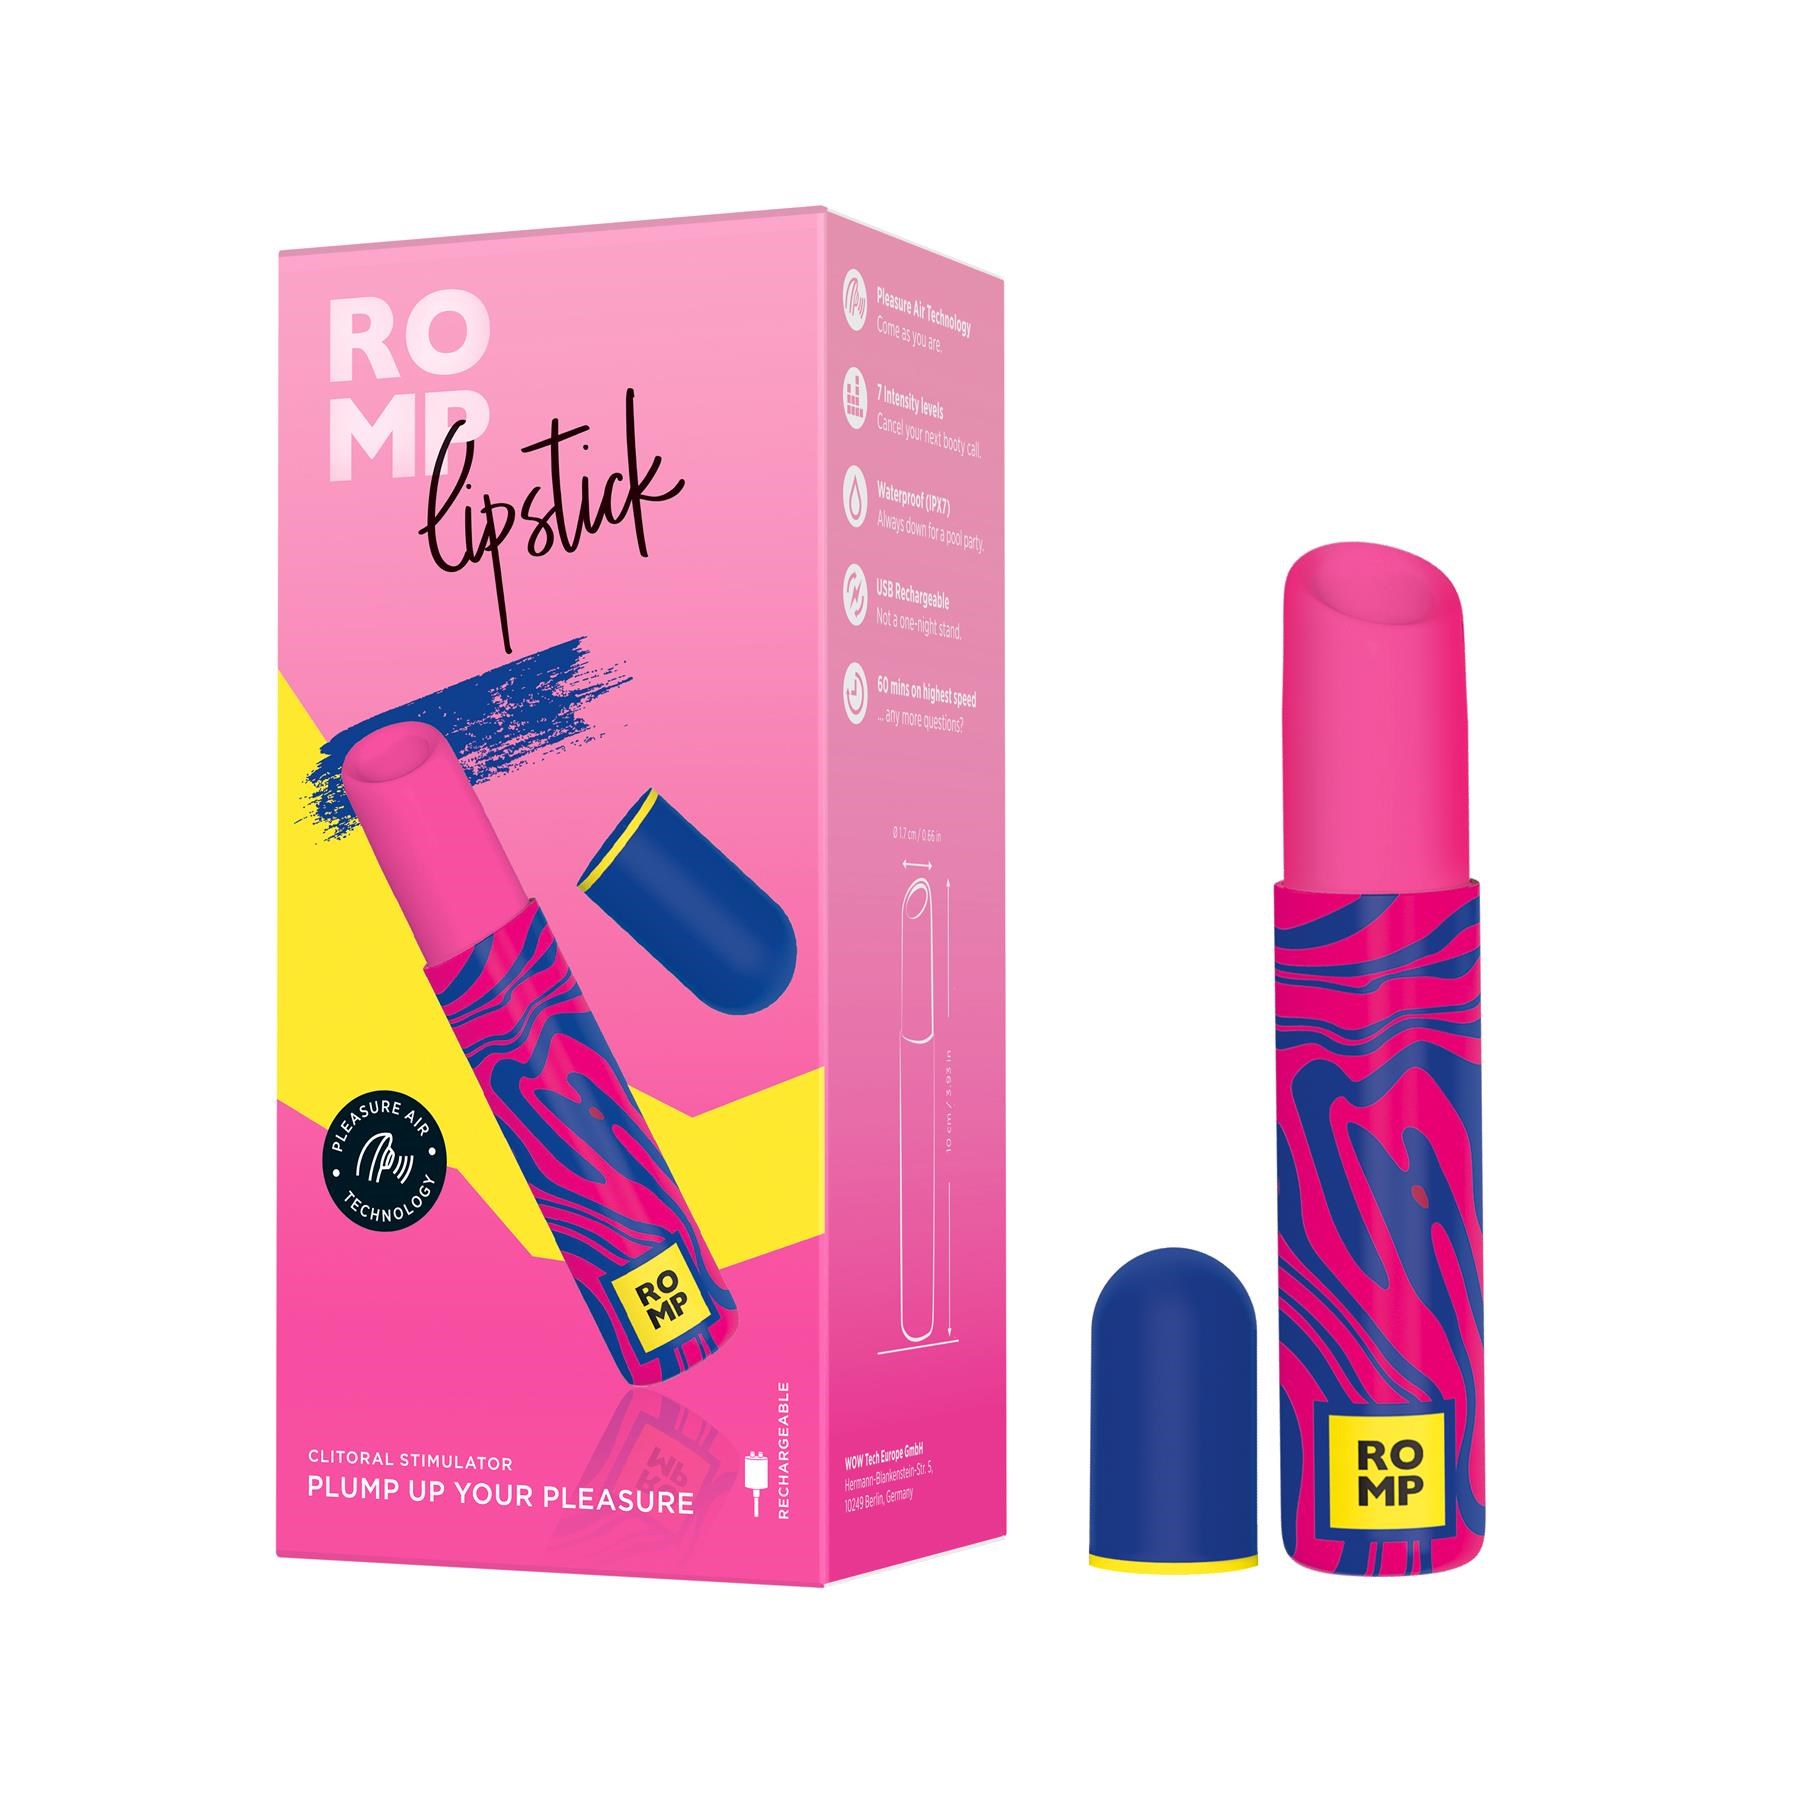 Romp Lipstick Vibrator- Product and Packaging